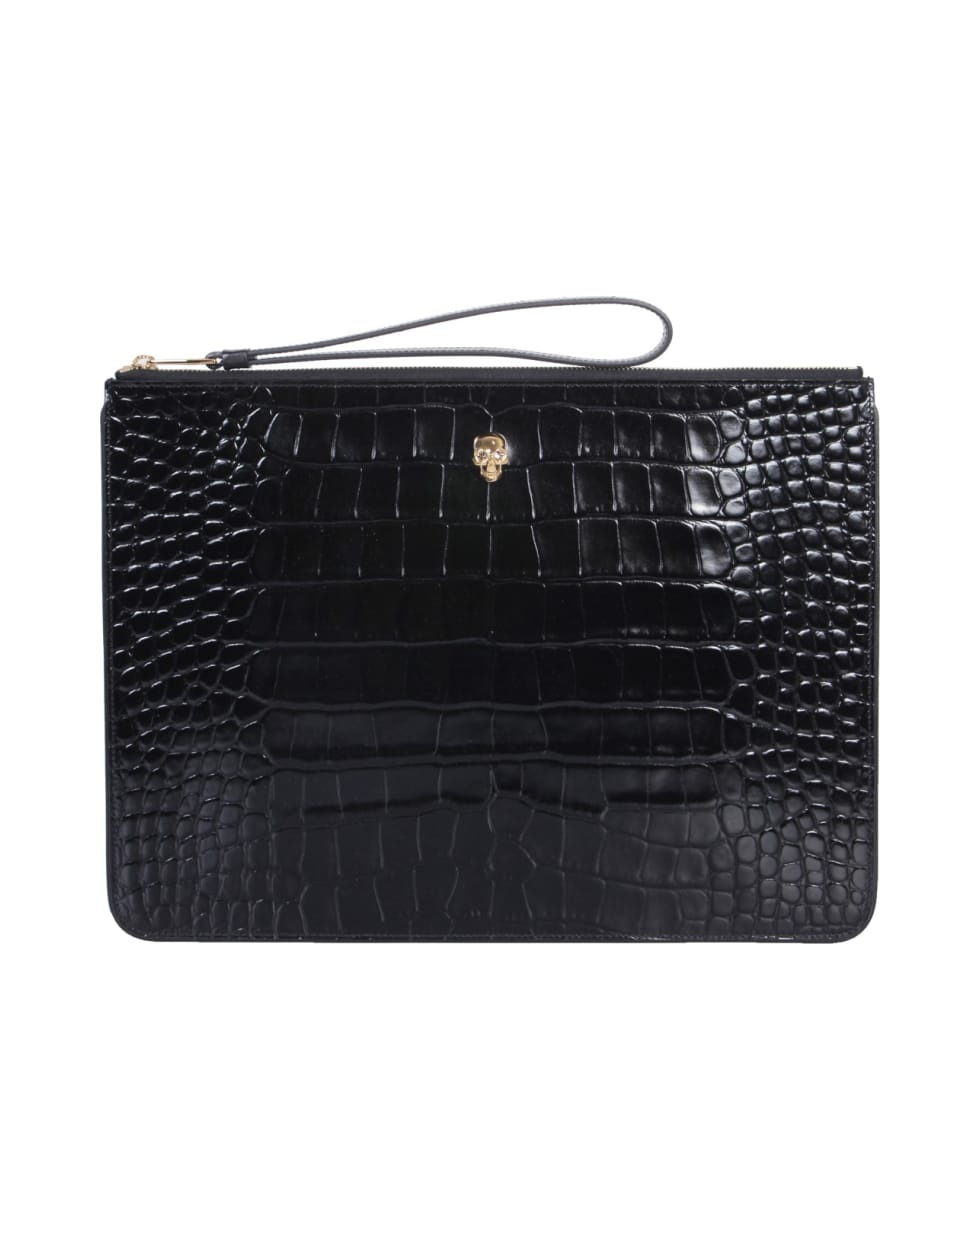 Alexander McQueen A4 Clutch With Skull | italist, ALWAYS LIKE A SALE